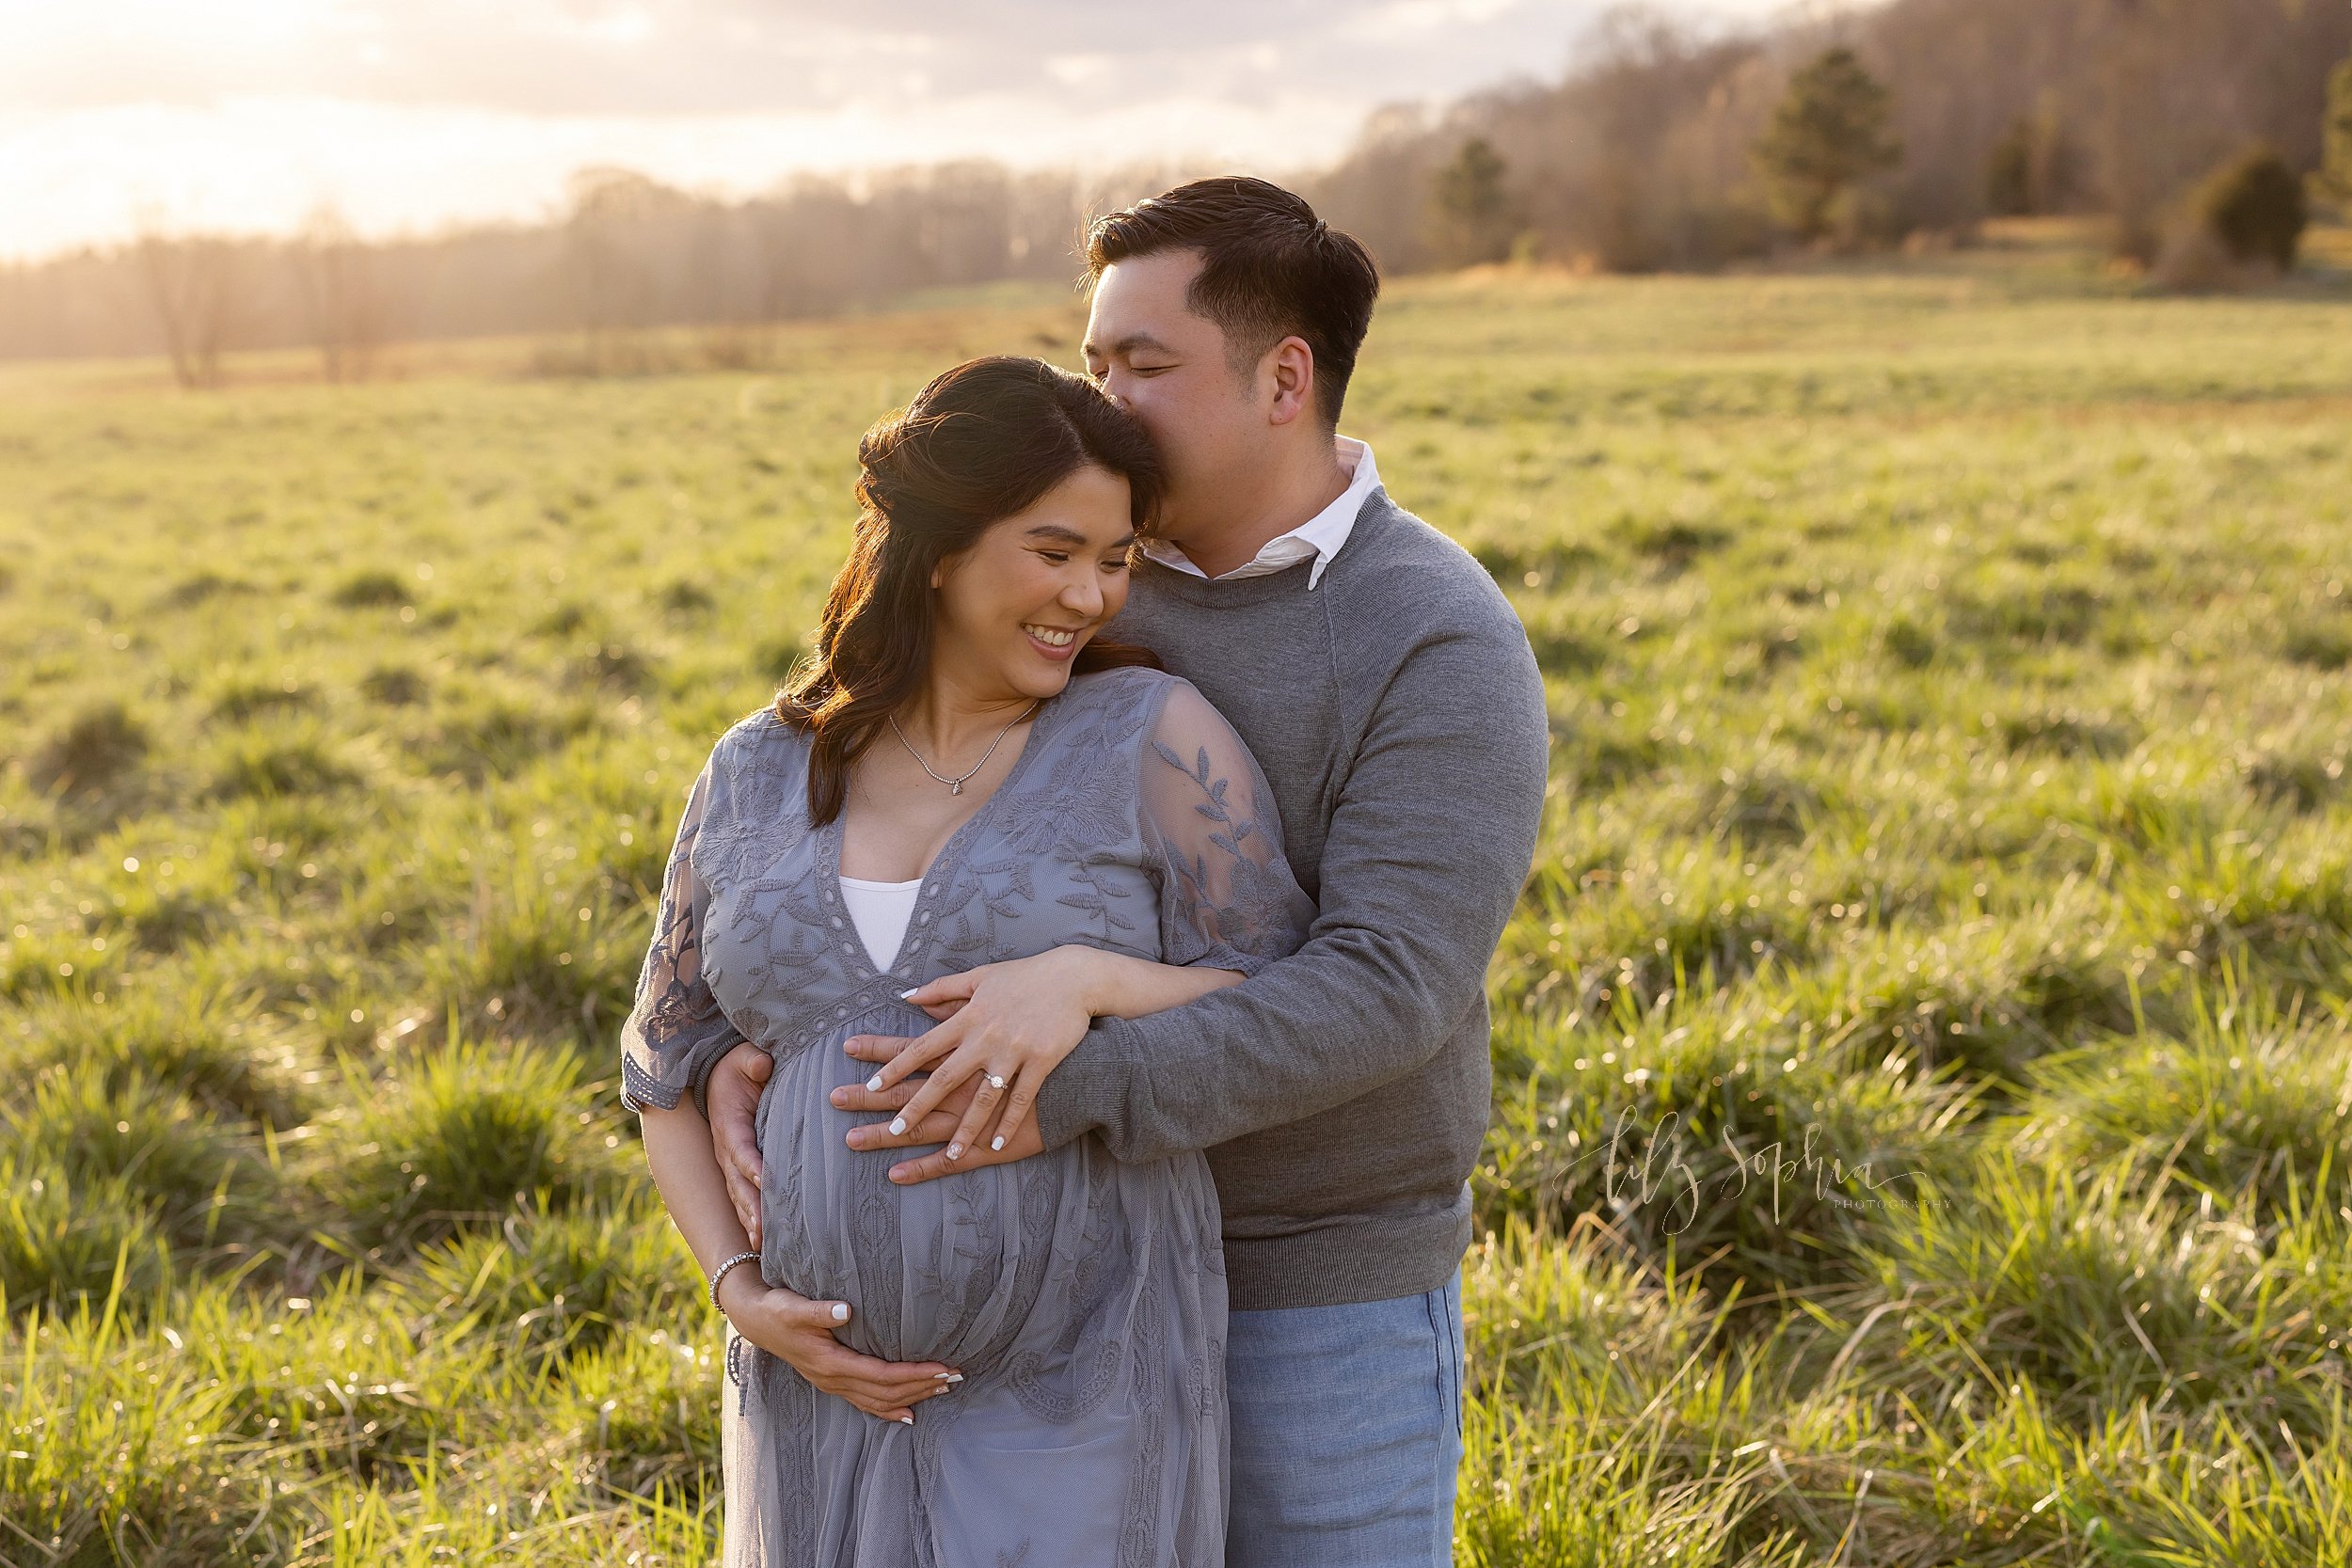  Maternity photo shoot of an expectant mother with her husband wrapping his arms around her from behind as both parents place their hands on their child in utero and the husband kisses his wife’s head while they stand at sunset in a field near Atlant